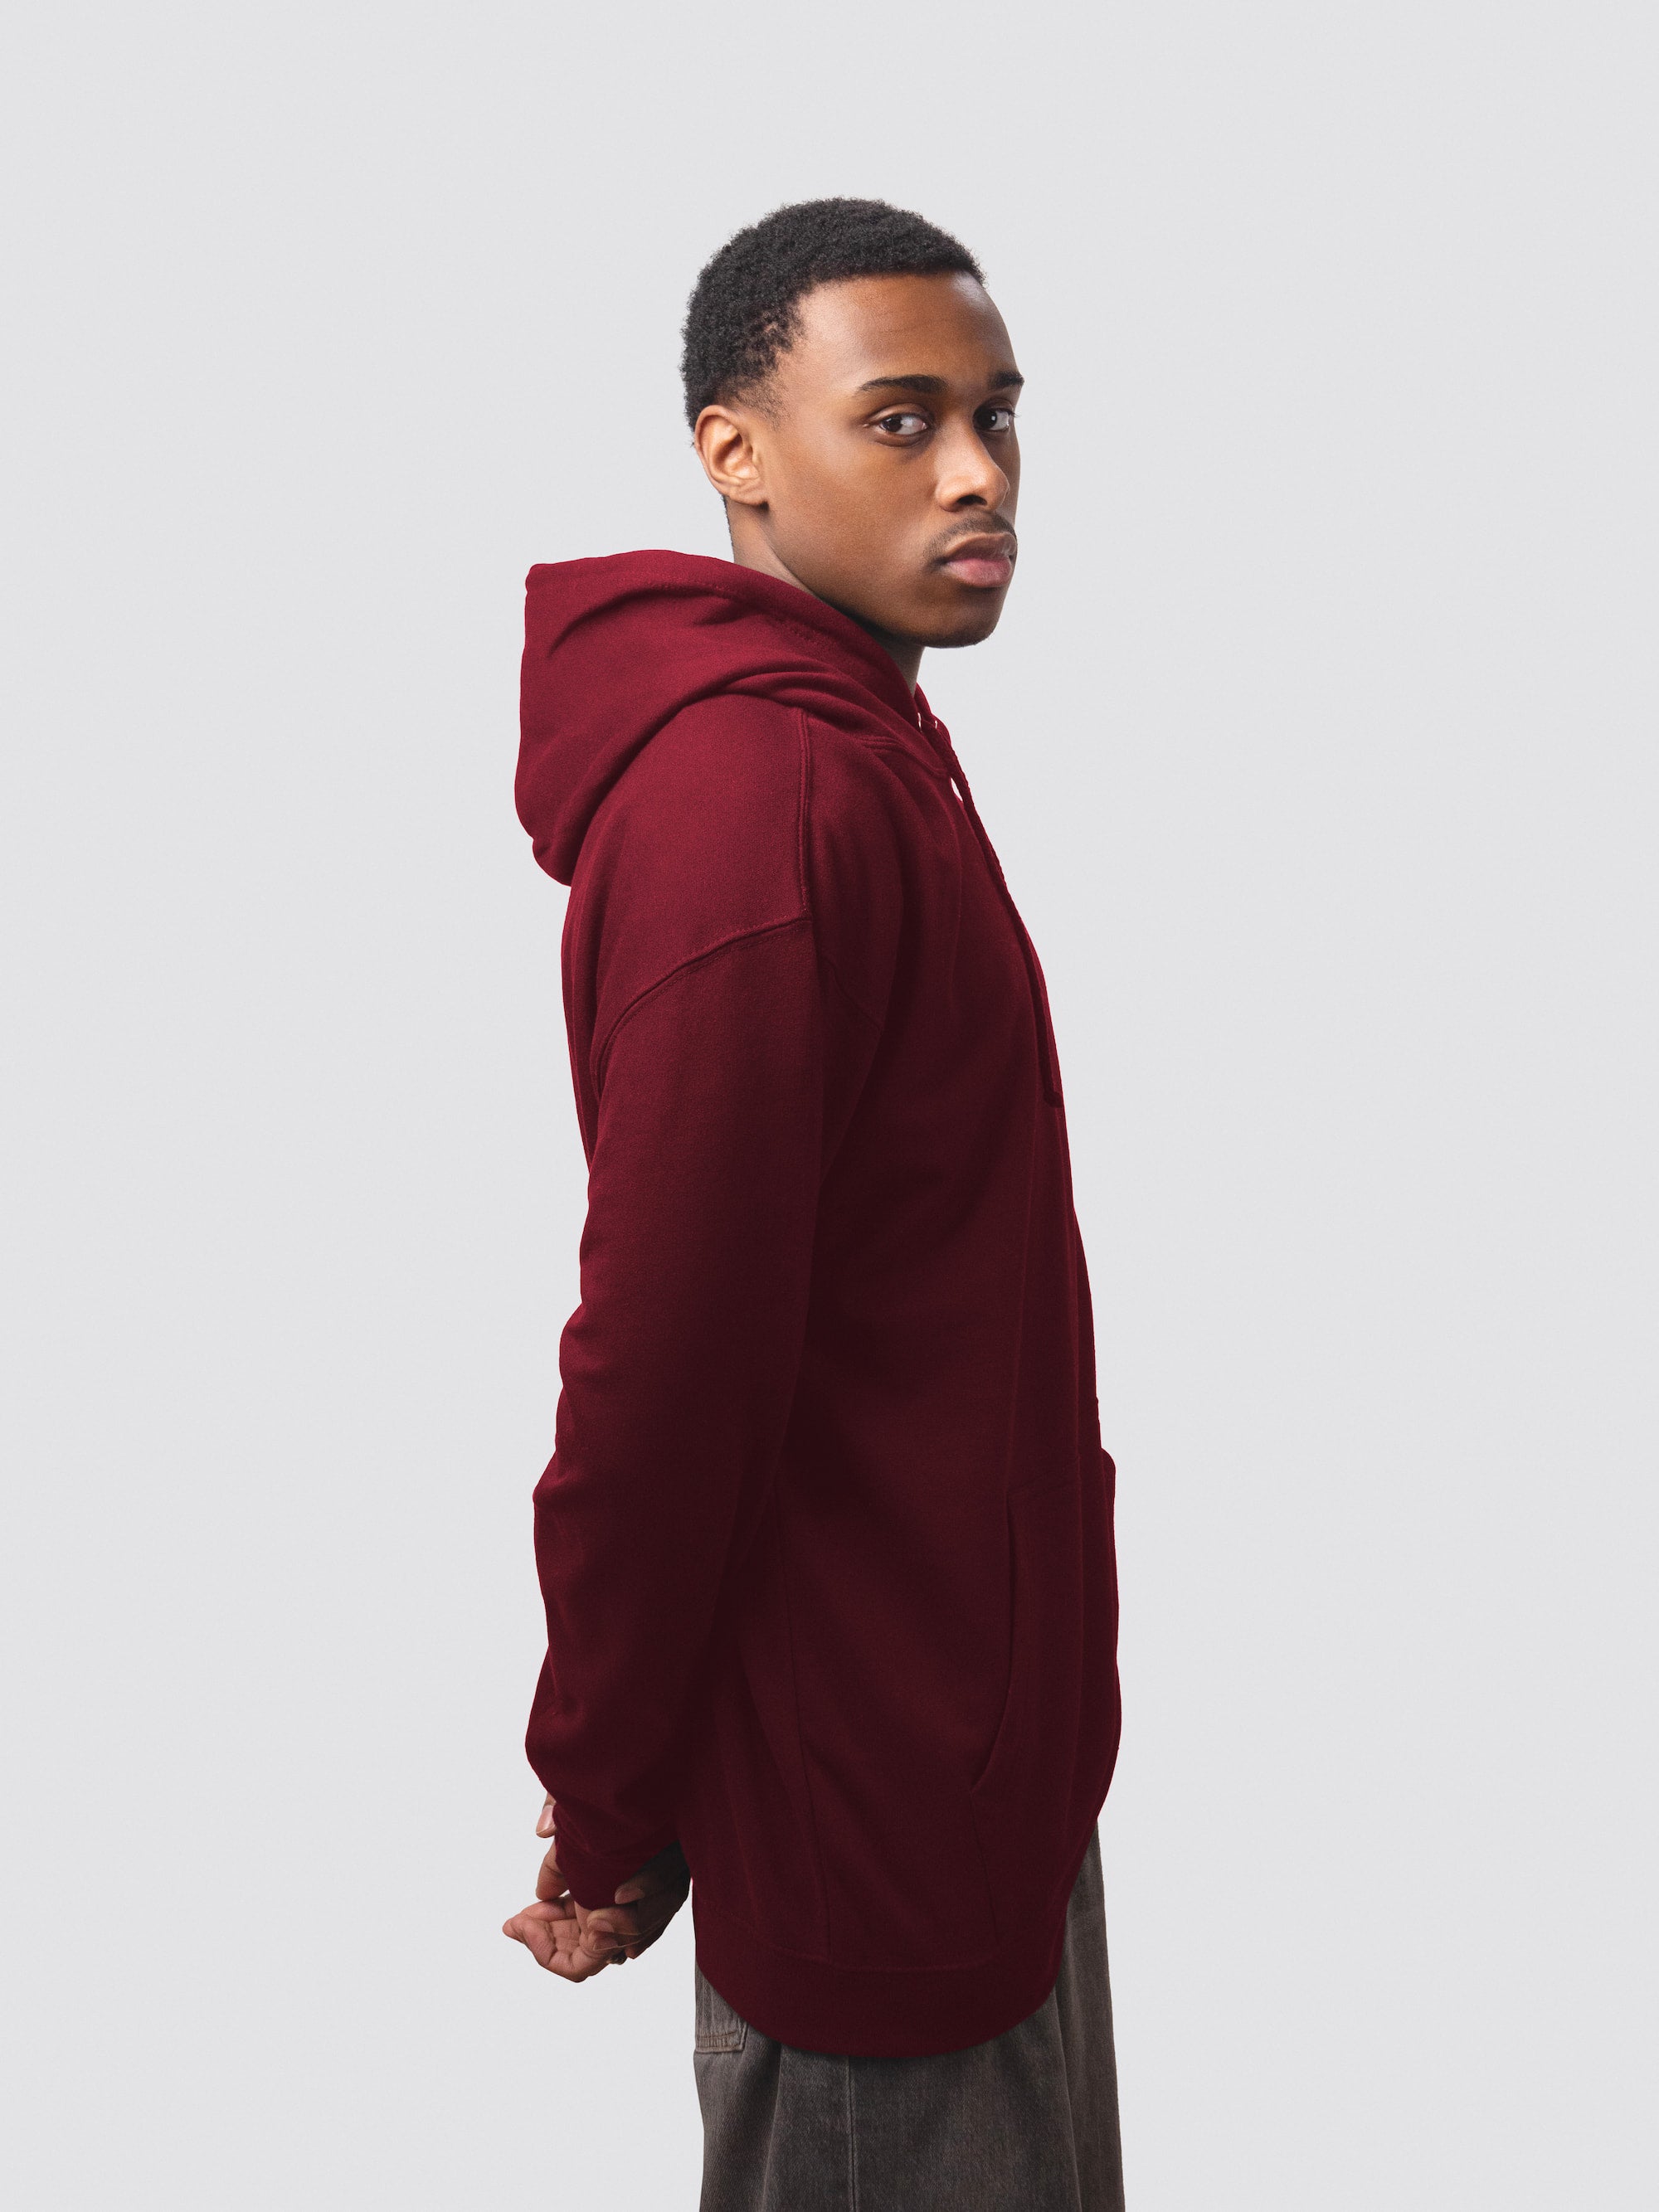 St Hugh's College hoodie, made from burgundy cotton-faced fabric